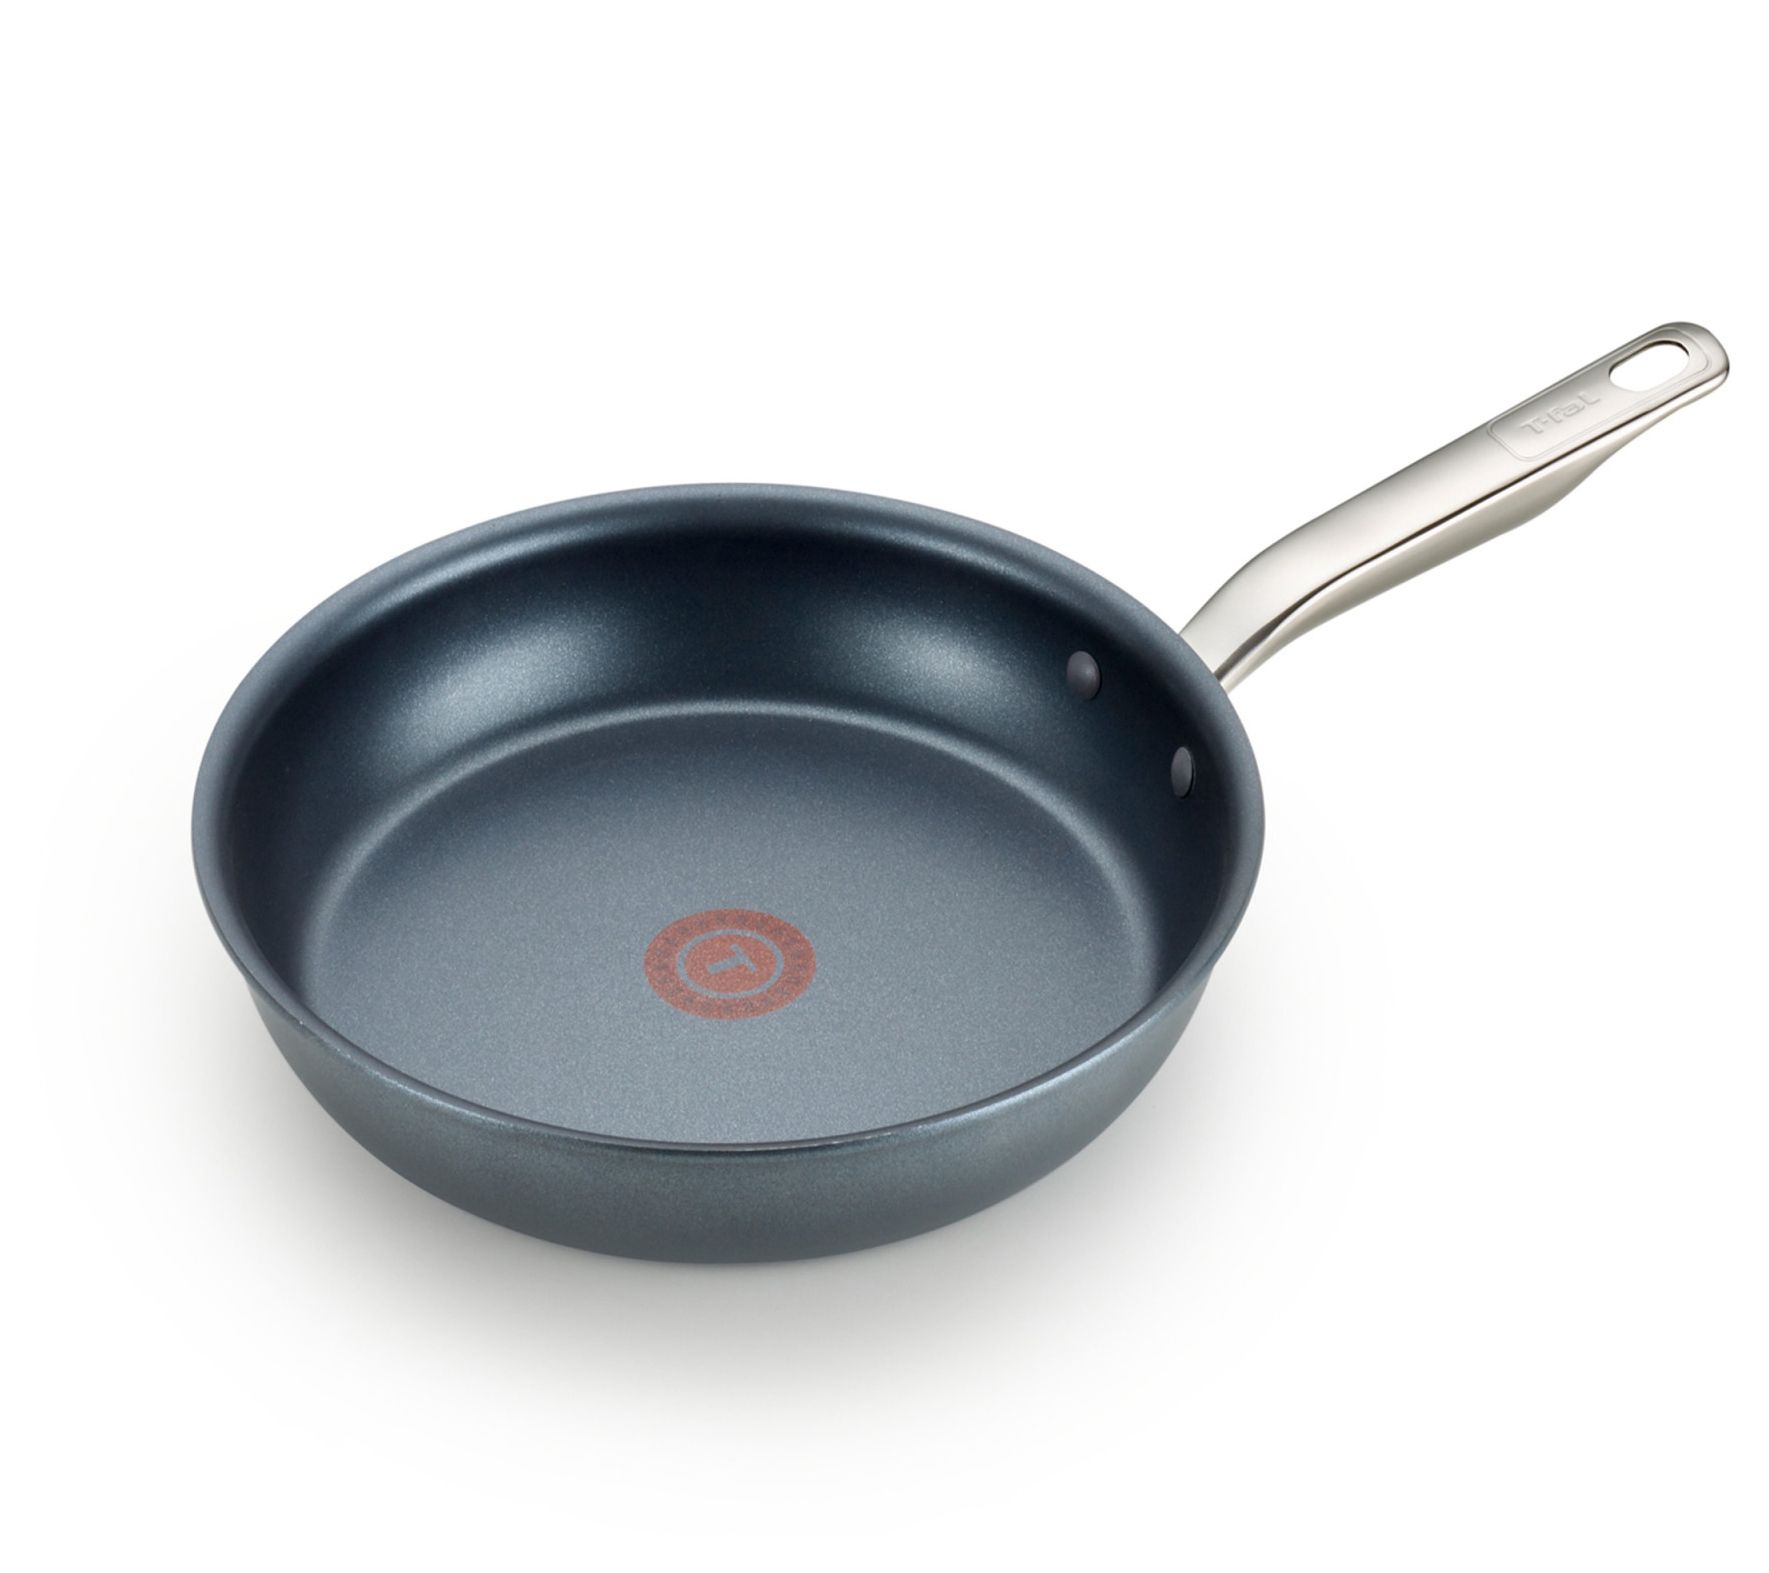 T-fal Excite 8 and 10.25-In. Non-stick Fry Pan Set, Red - On Sale